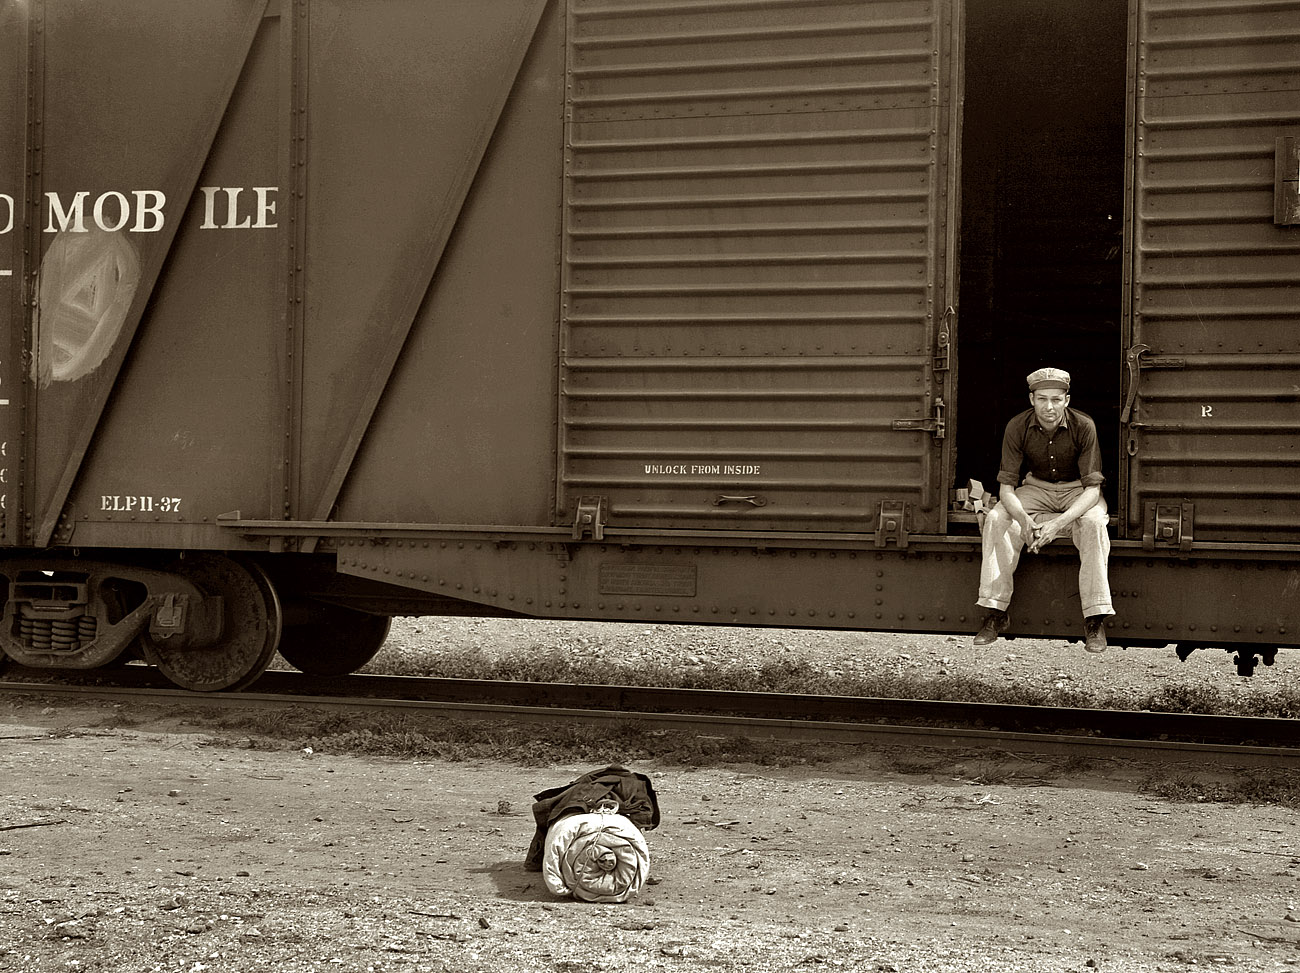 February 1939. Calipatria, Imperial Valley. Car on siding across tracks from pea packing plant. Twenty-five year old itinerant, originally from Oregon. "On the road eight years, all over the country, every state in the union, back and forth, pick up a job here and there, traveling all the time." View full size.  Medium format nitrate negative by Dorothea Lange for the Farm Security Administration.